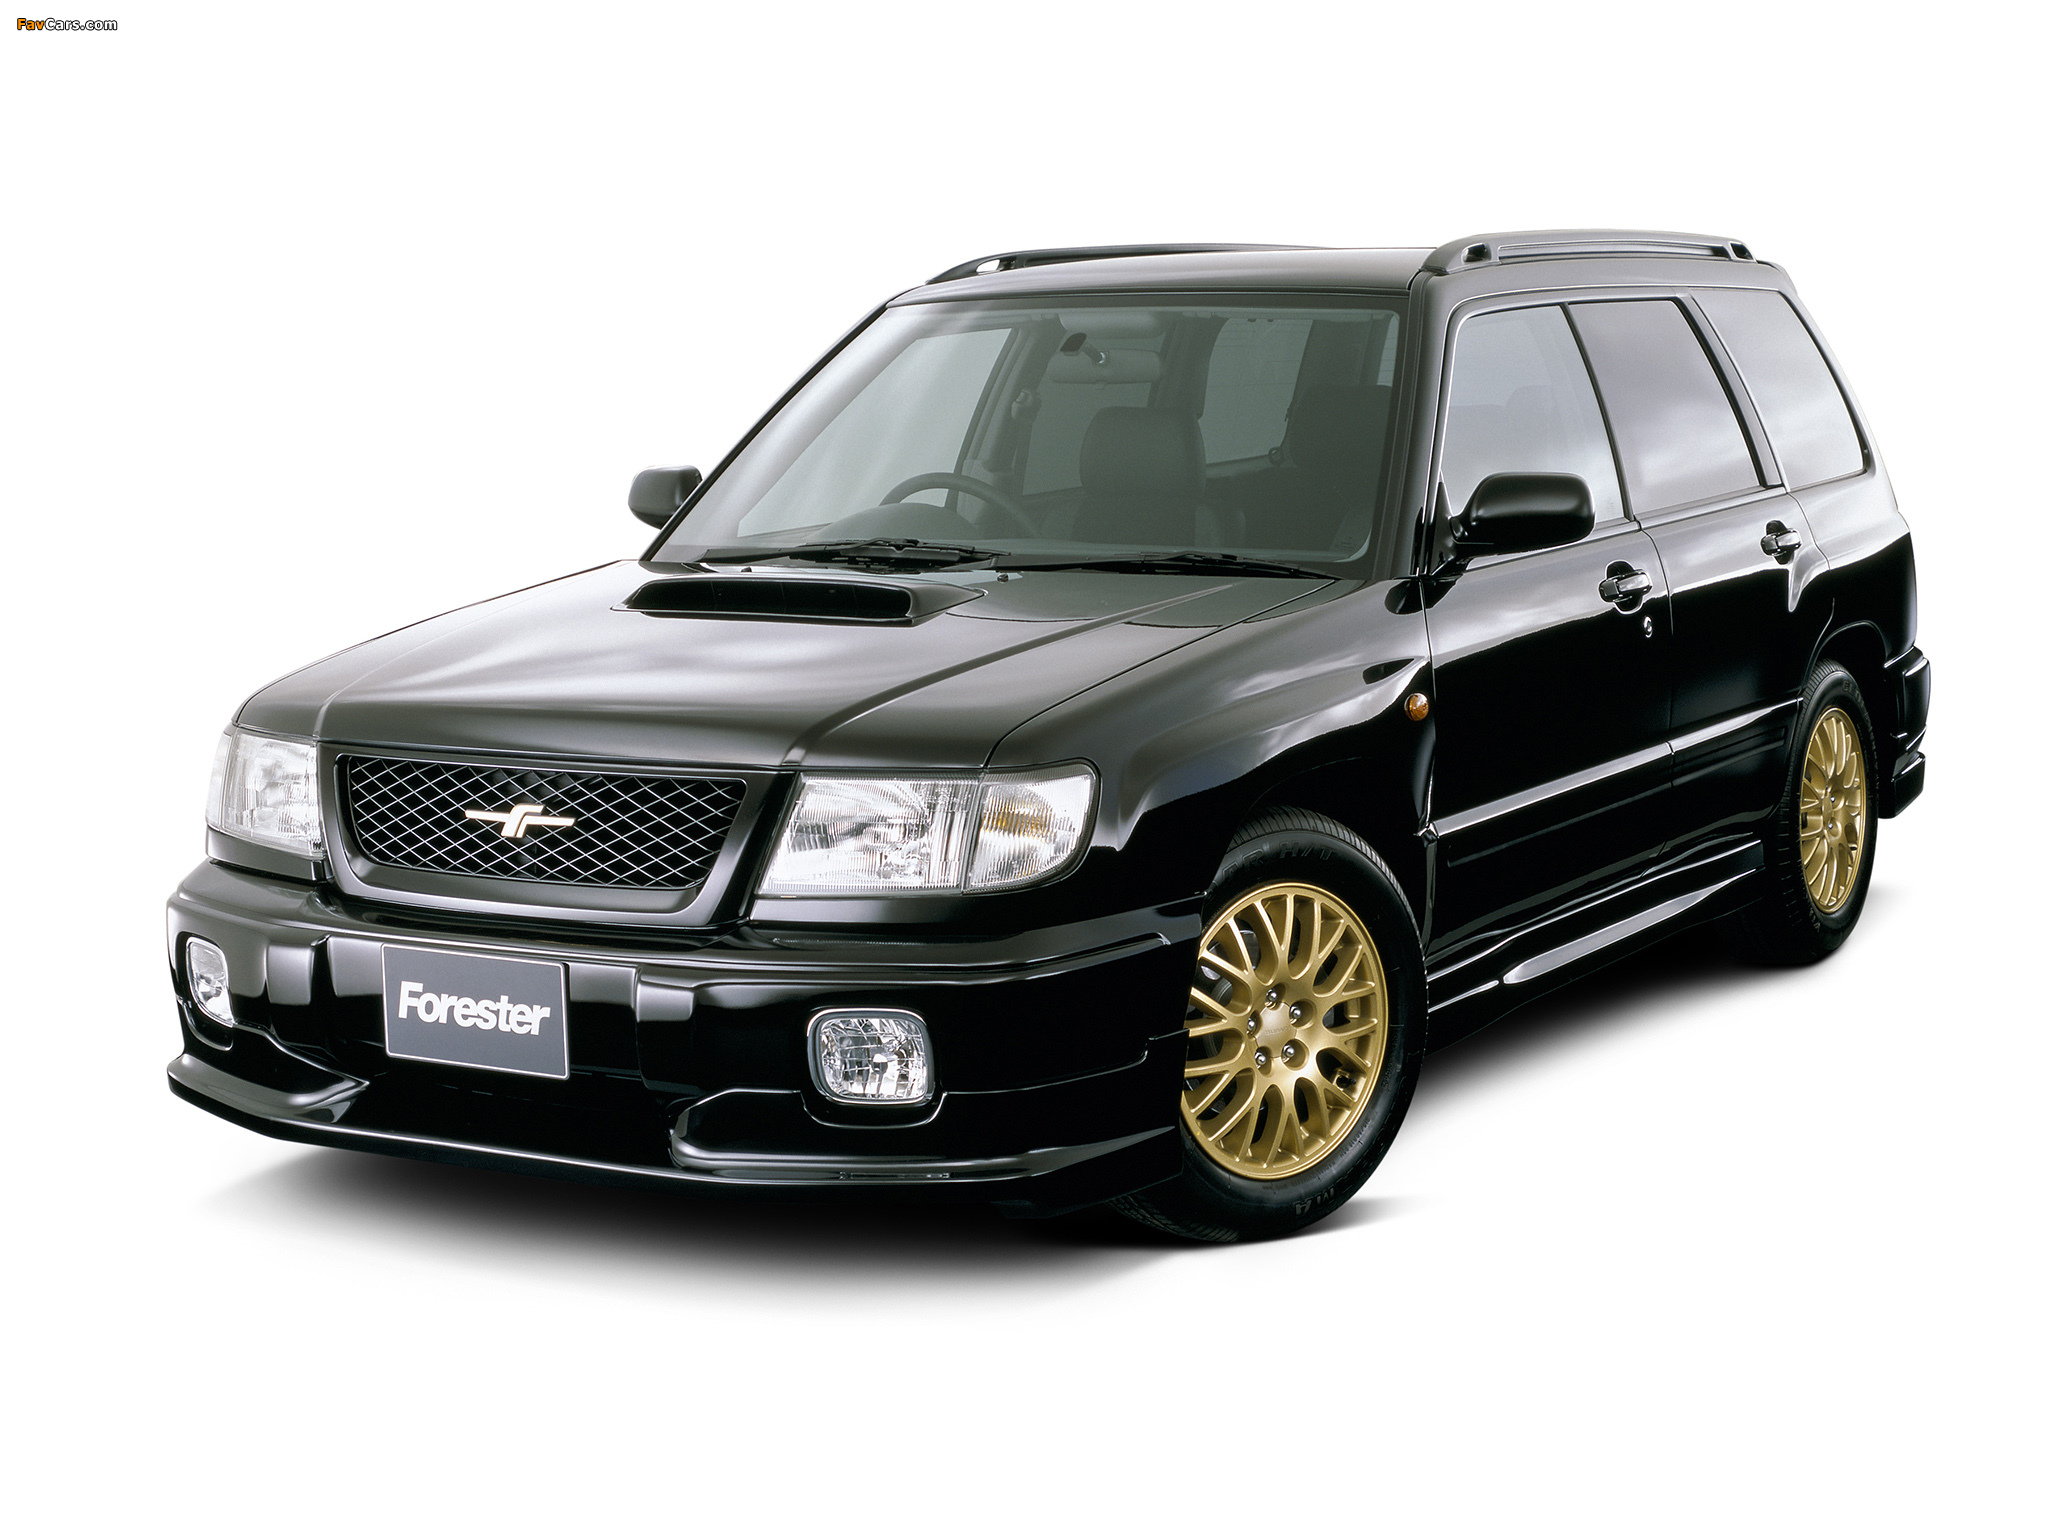 Subaru Forester Turbo Type A 19992000 wallpapers (2048x1536)